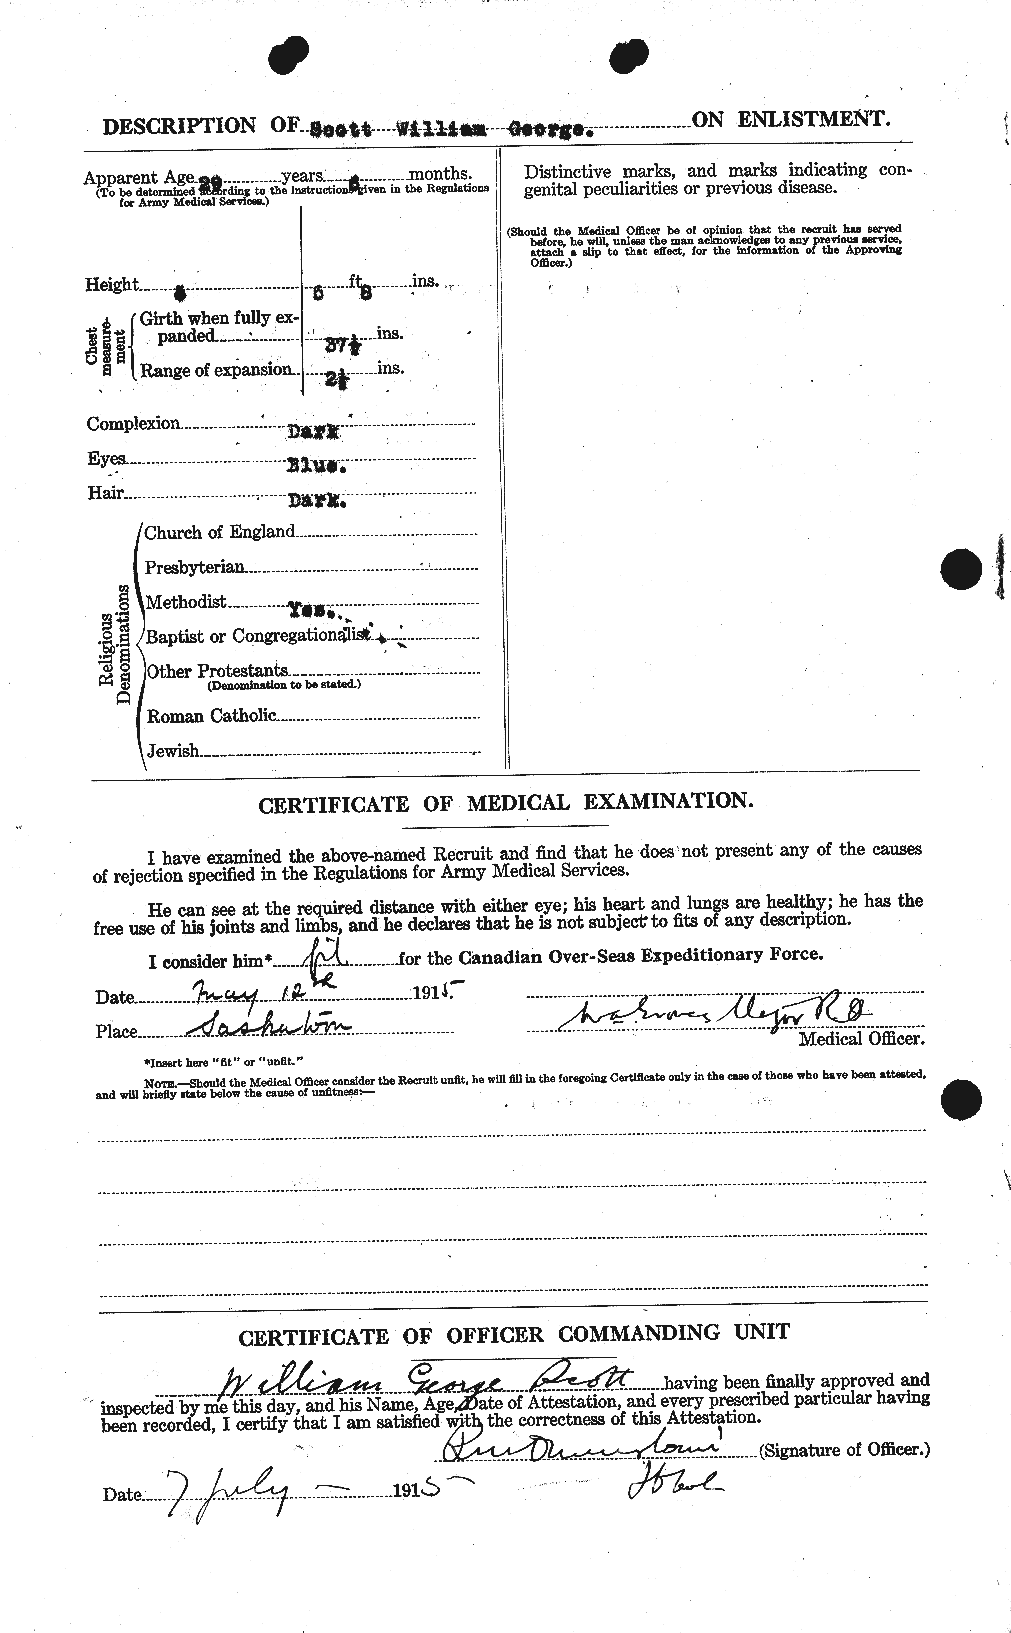 Personnel Records of the First World War - CEF 087014b